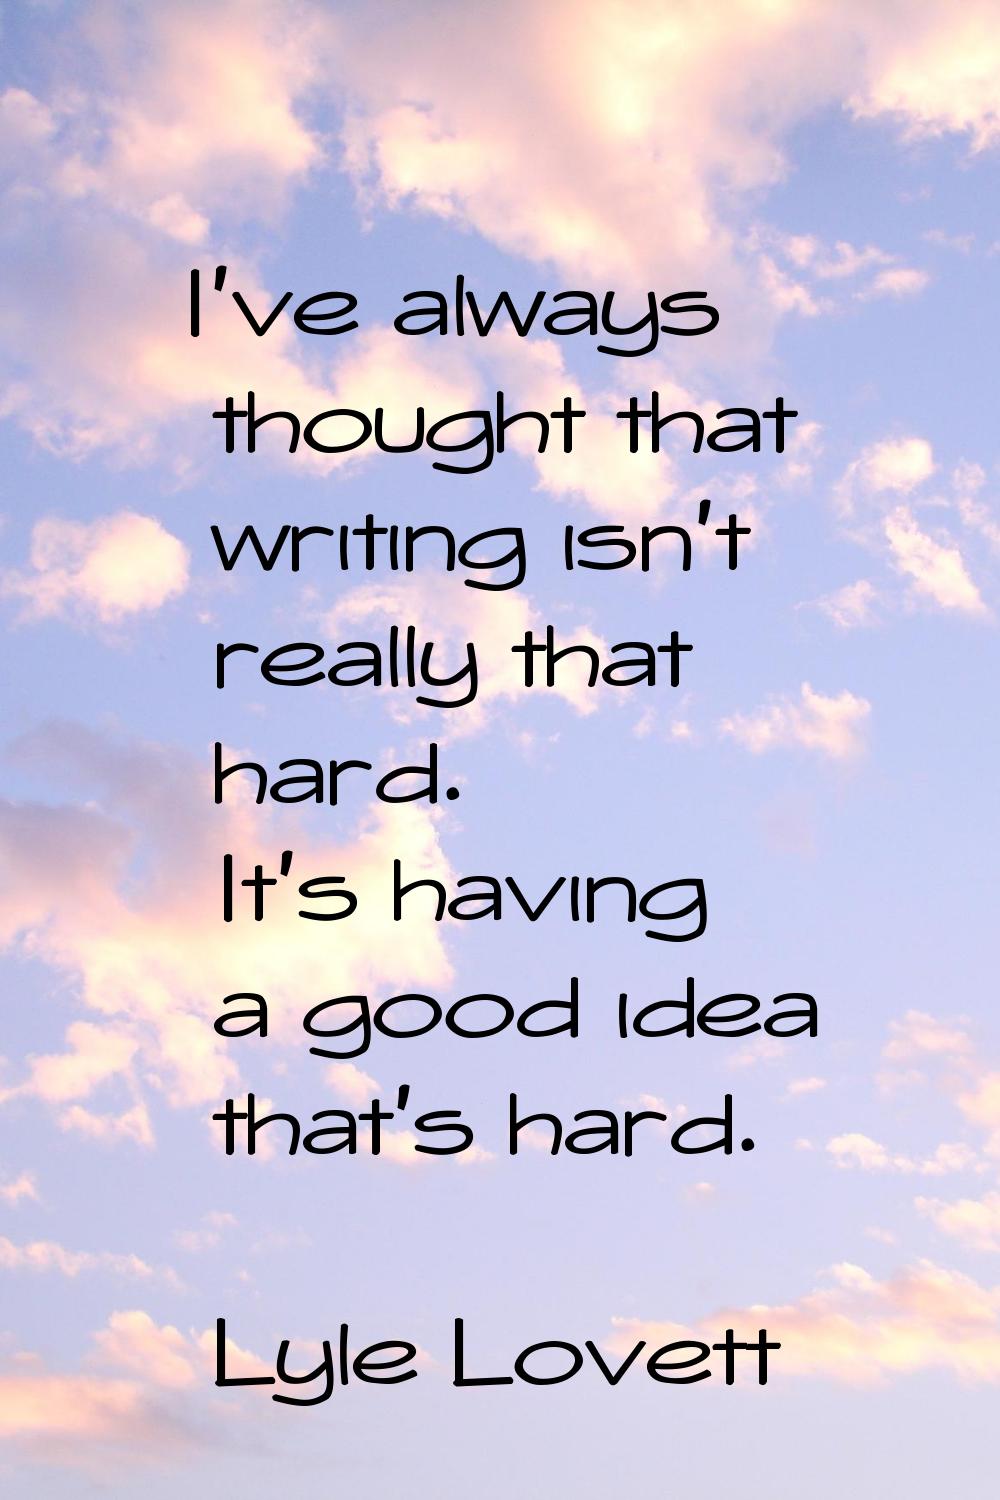 I've always thought that writing isn't really that hard. It's having a good idea that's hard.